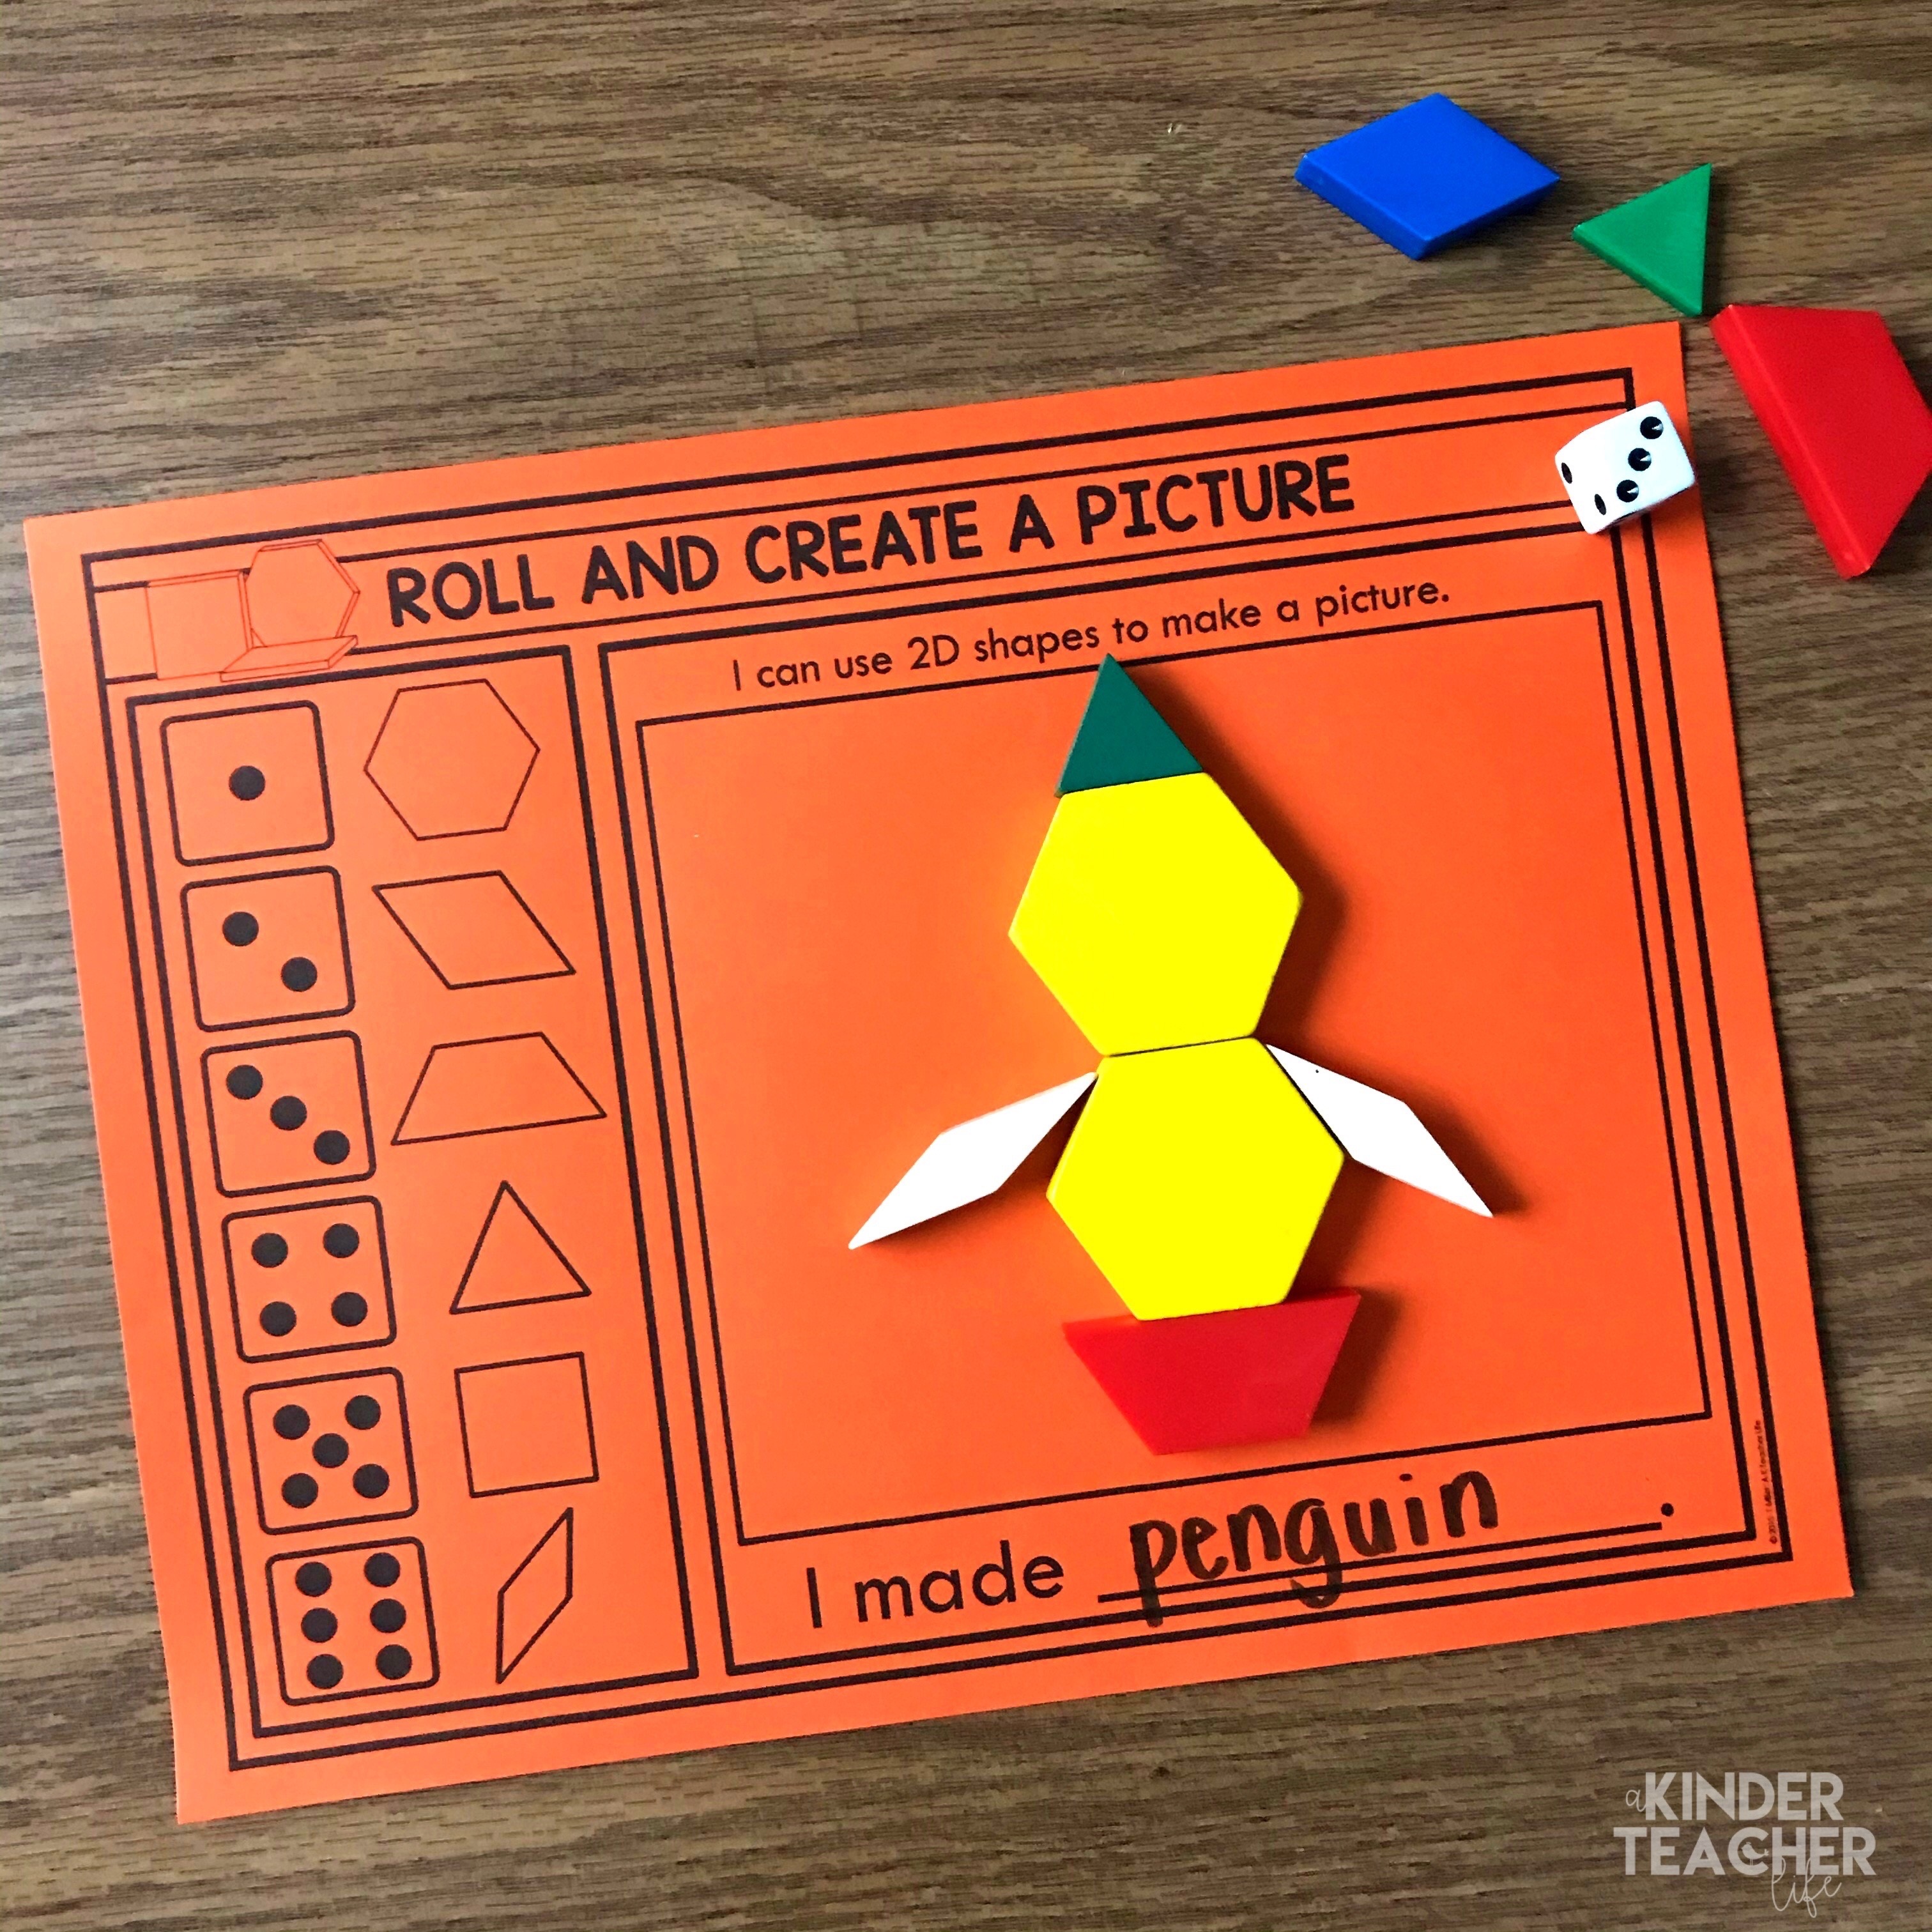 Use 2D shapes to create a picture. 